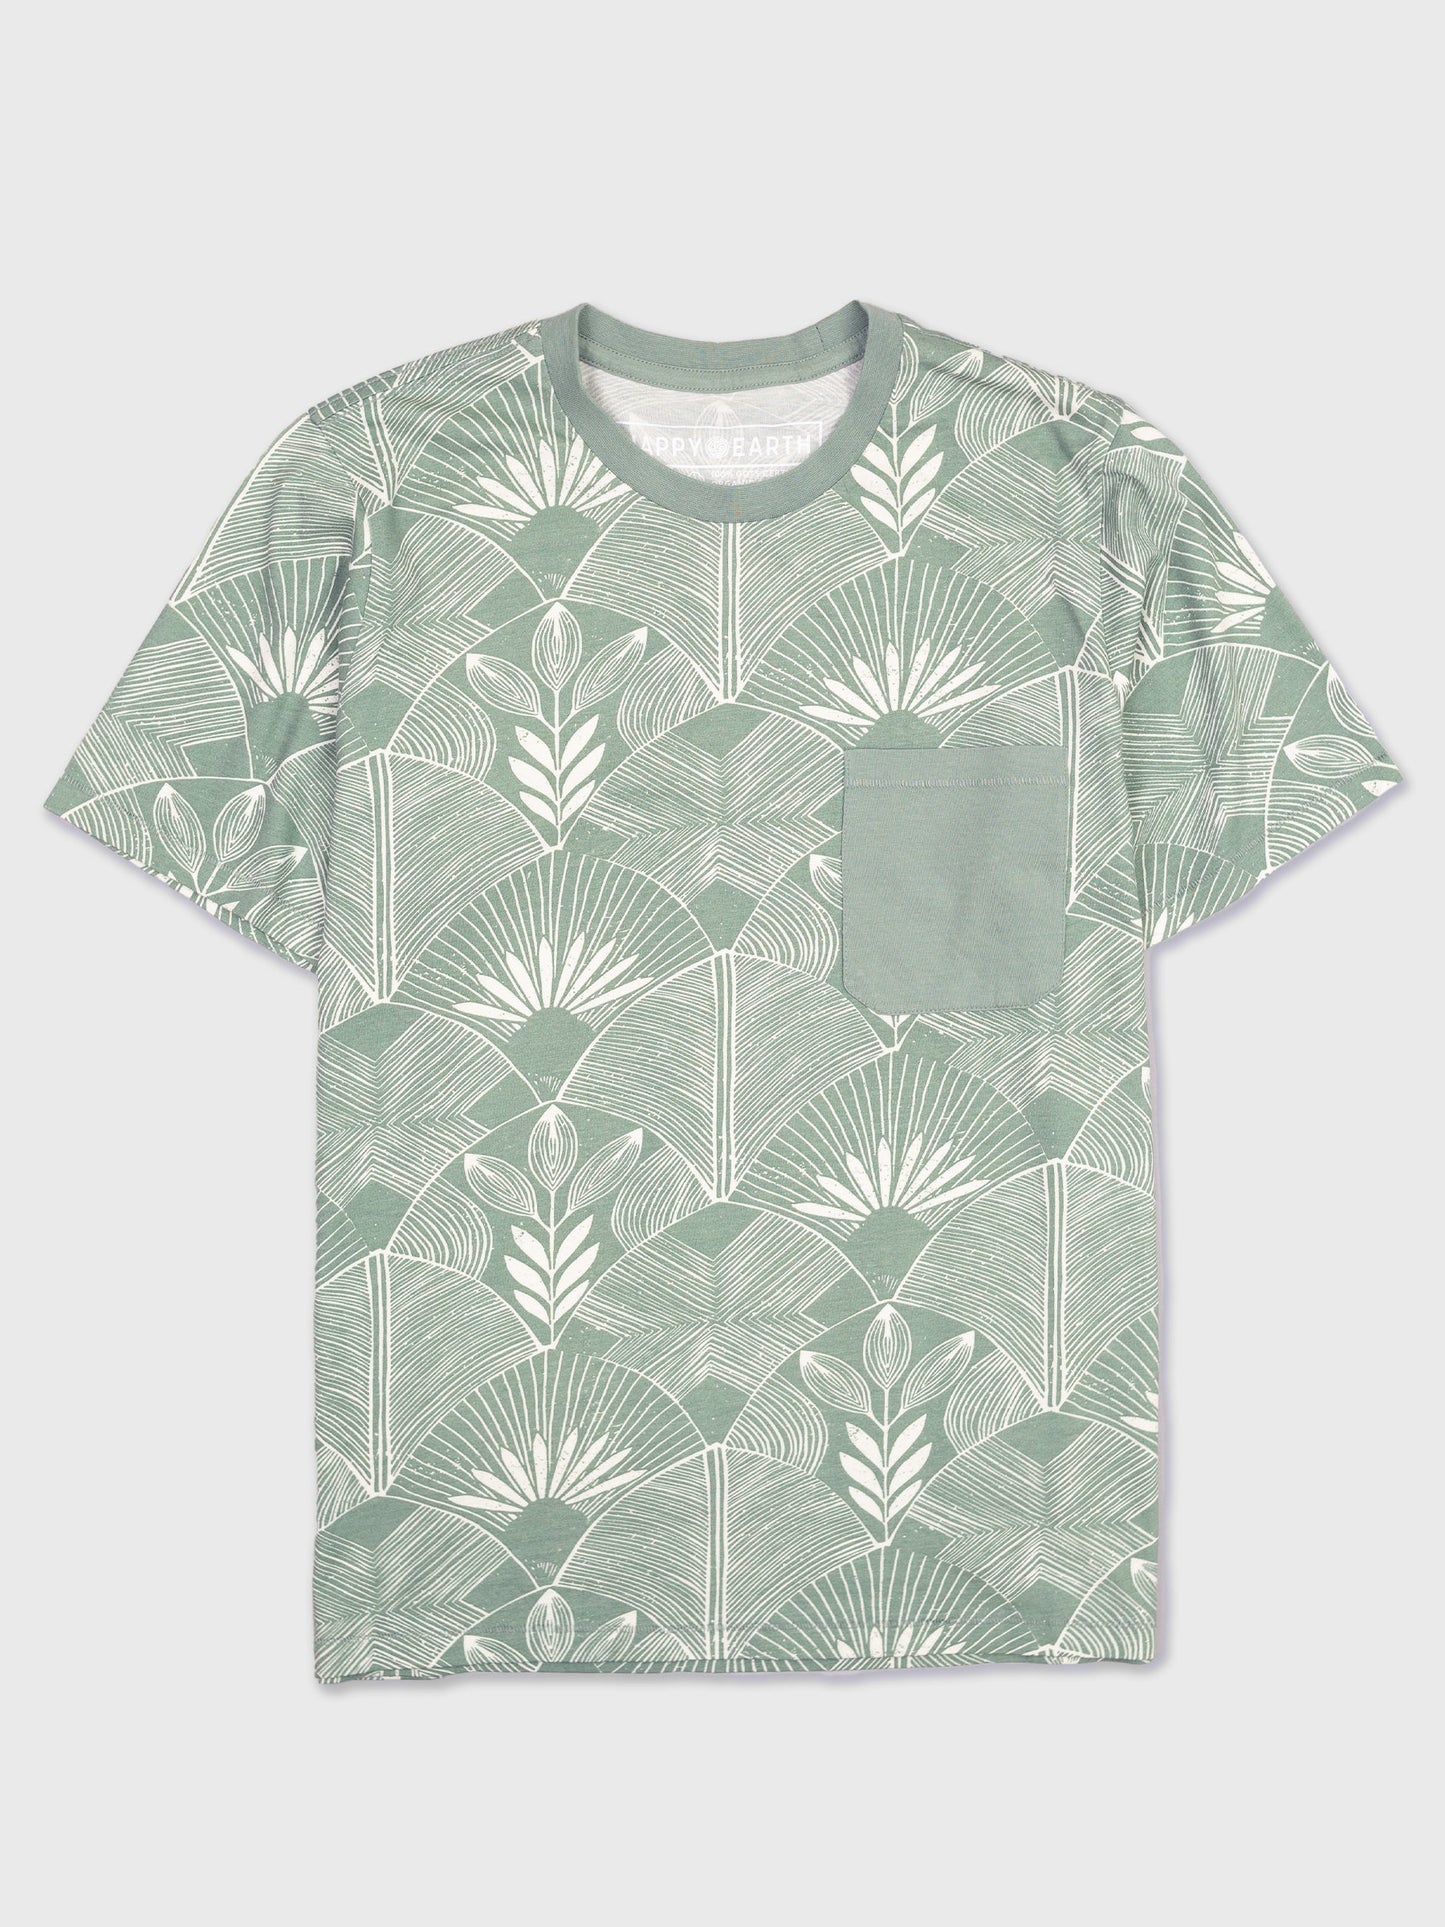 Deco Frond Pocket Tee by Happy Earth